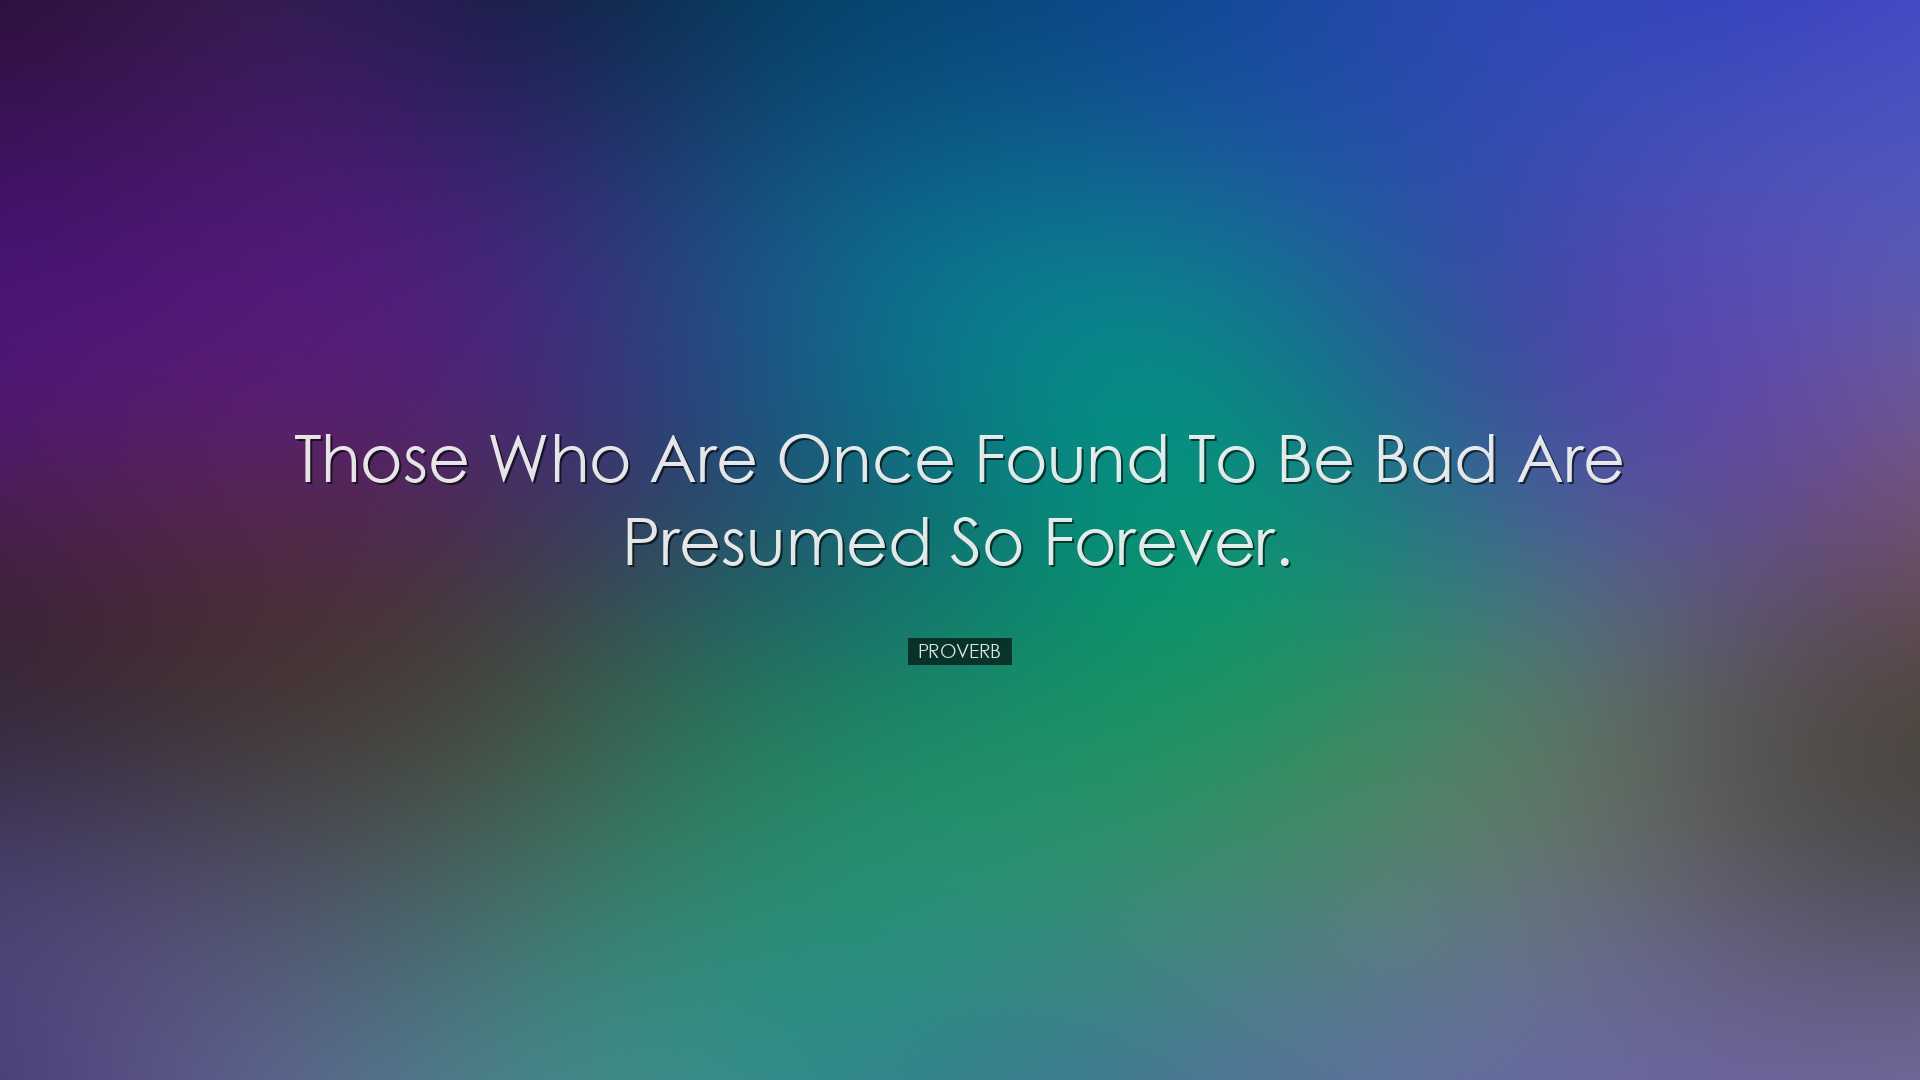 Those who are once found to be bad are presumed so forever. - Prov